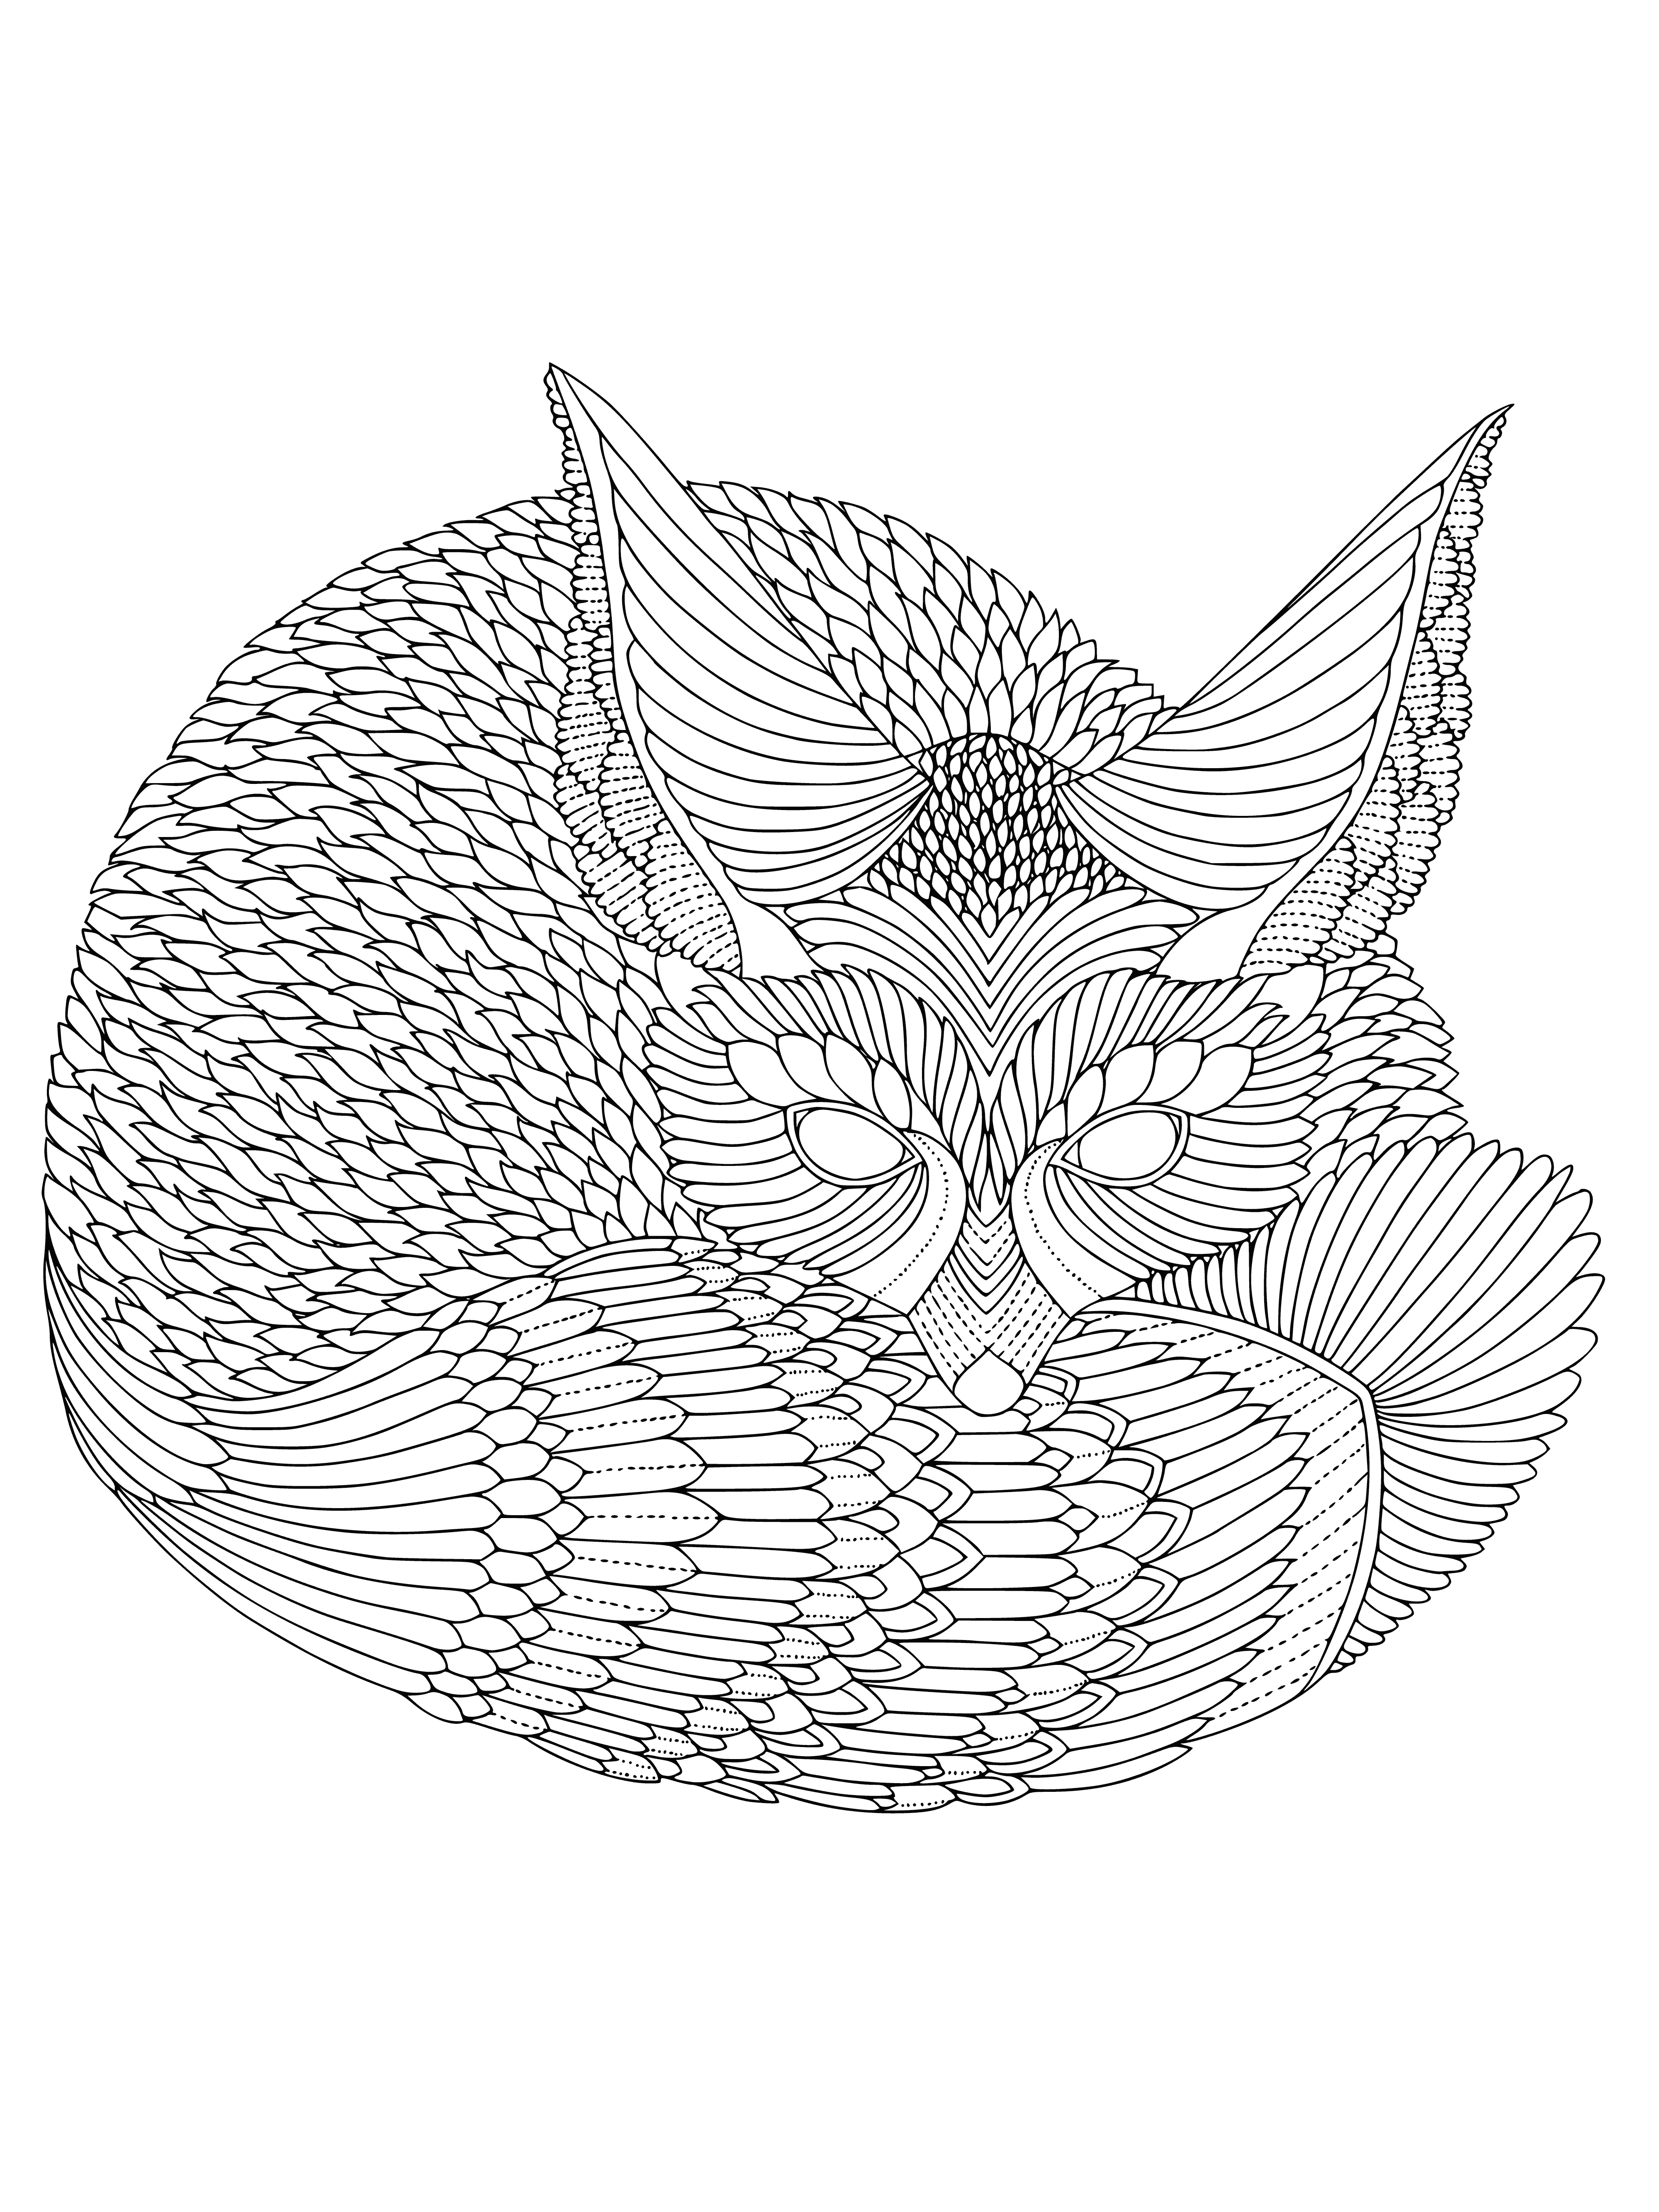 Fox coloring page